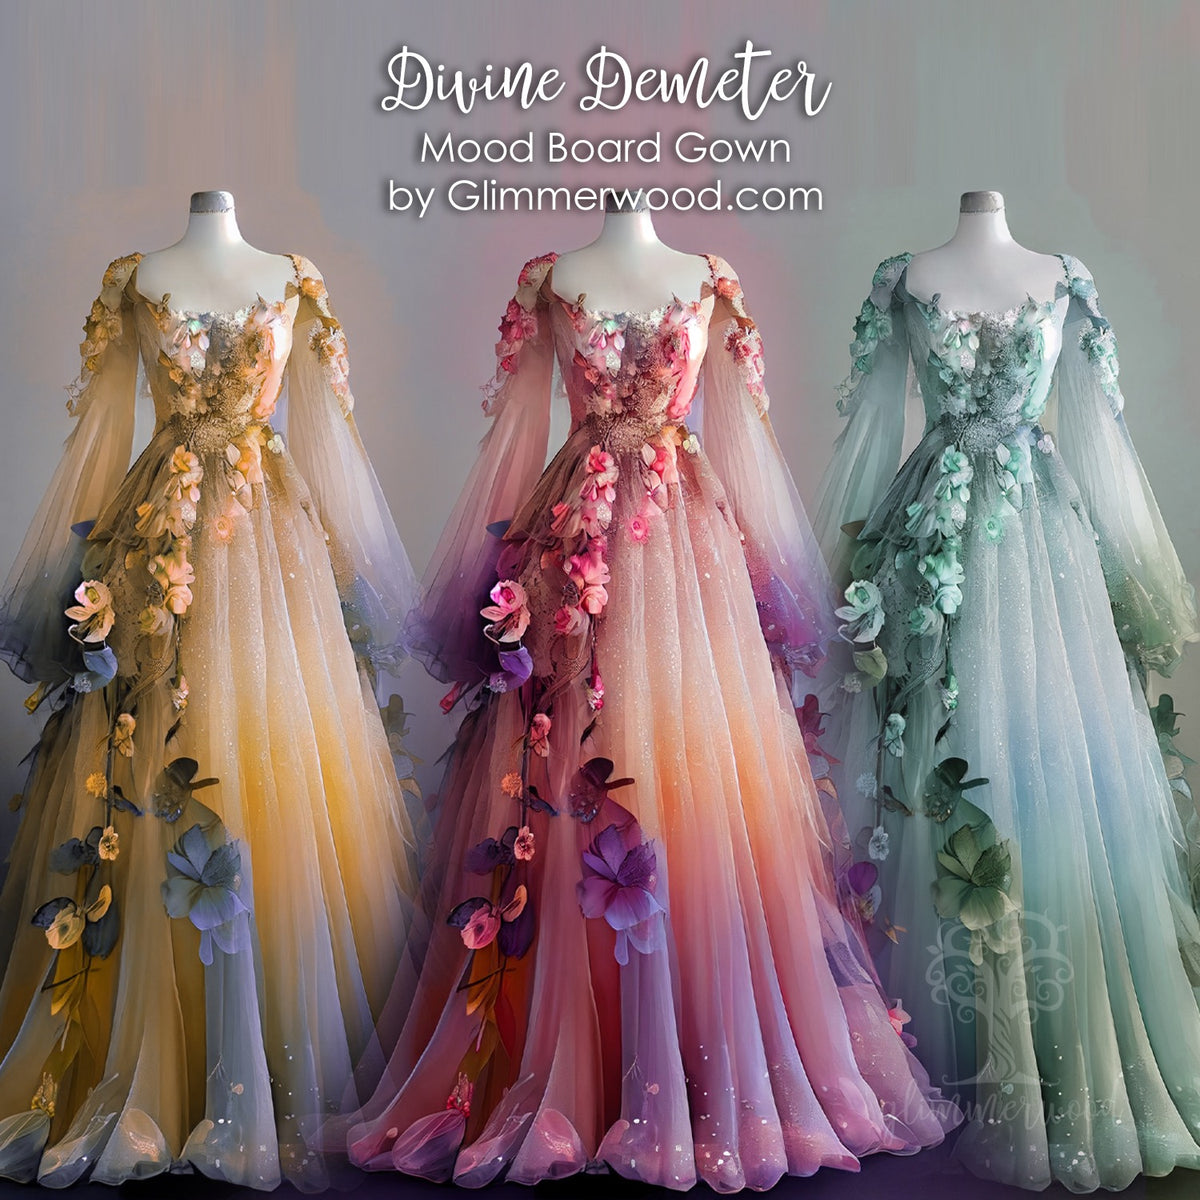 Divine Demeter - Limited-Edition Mood Board Gown